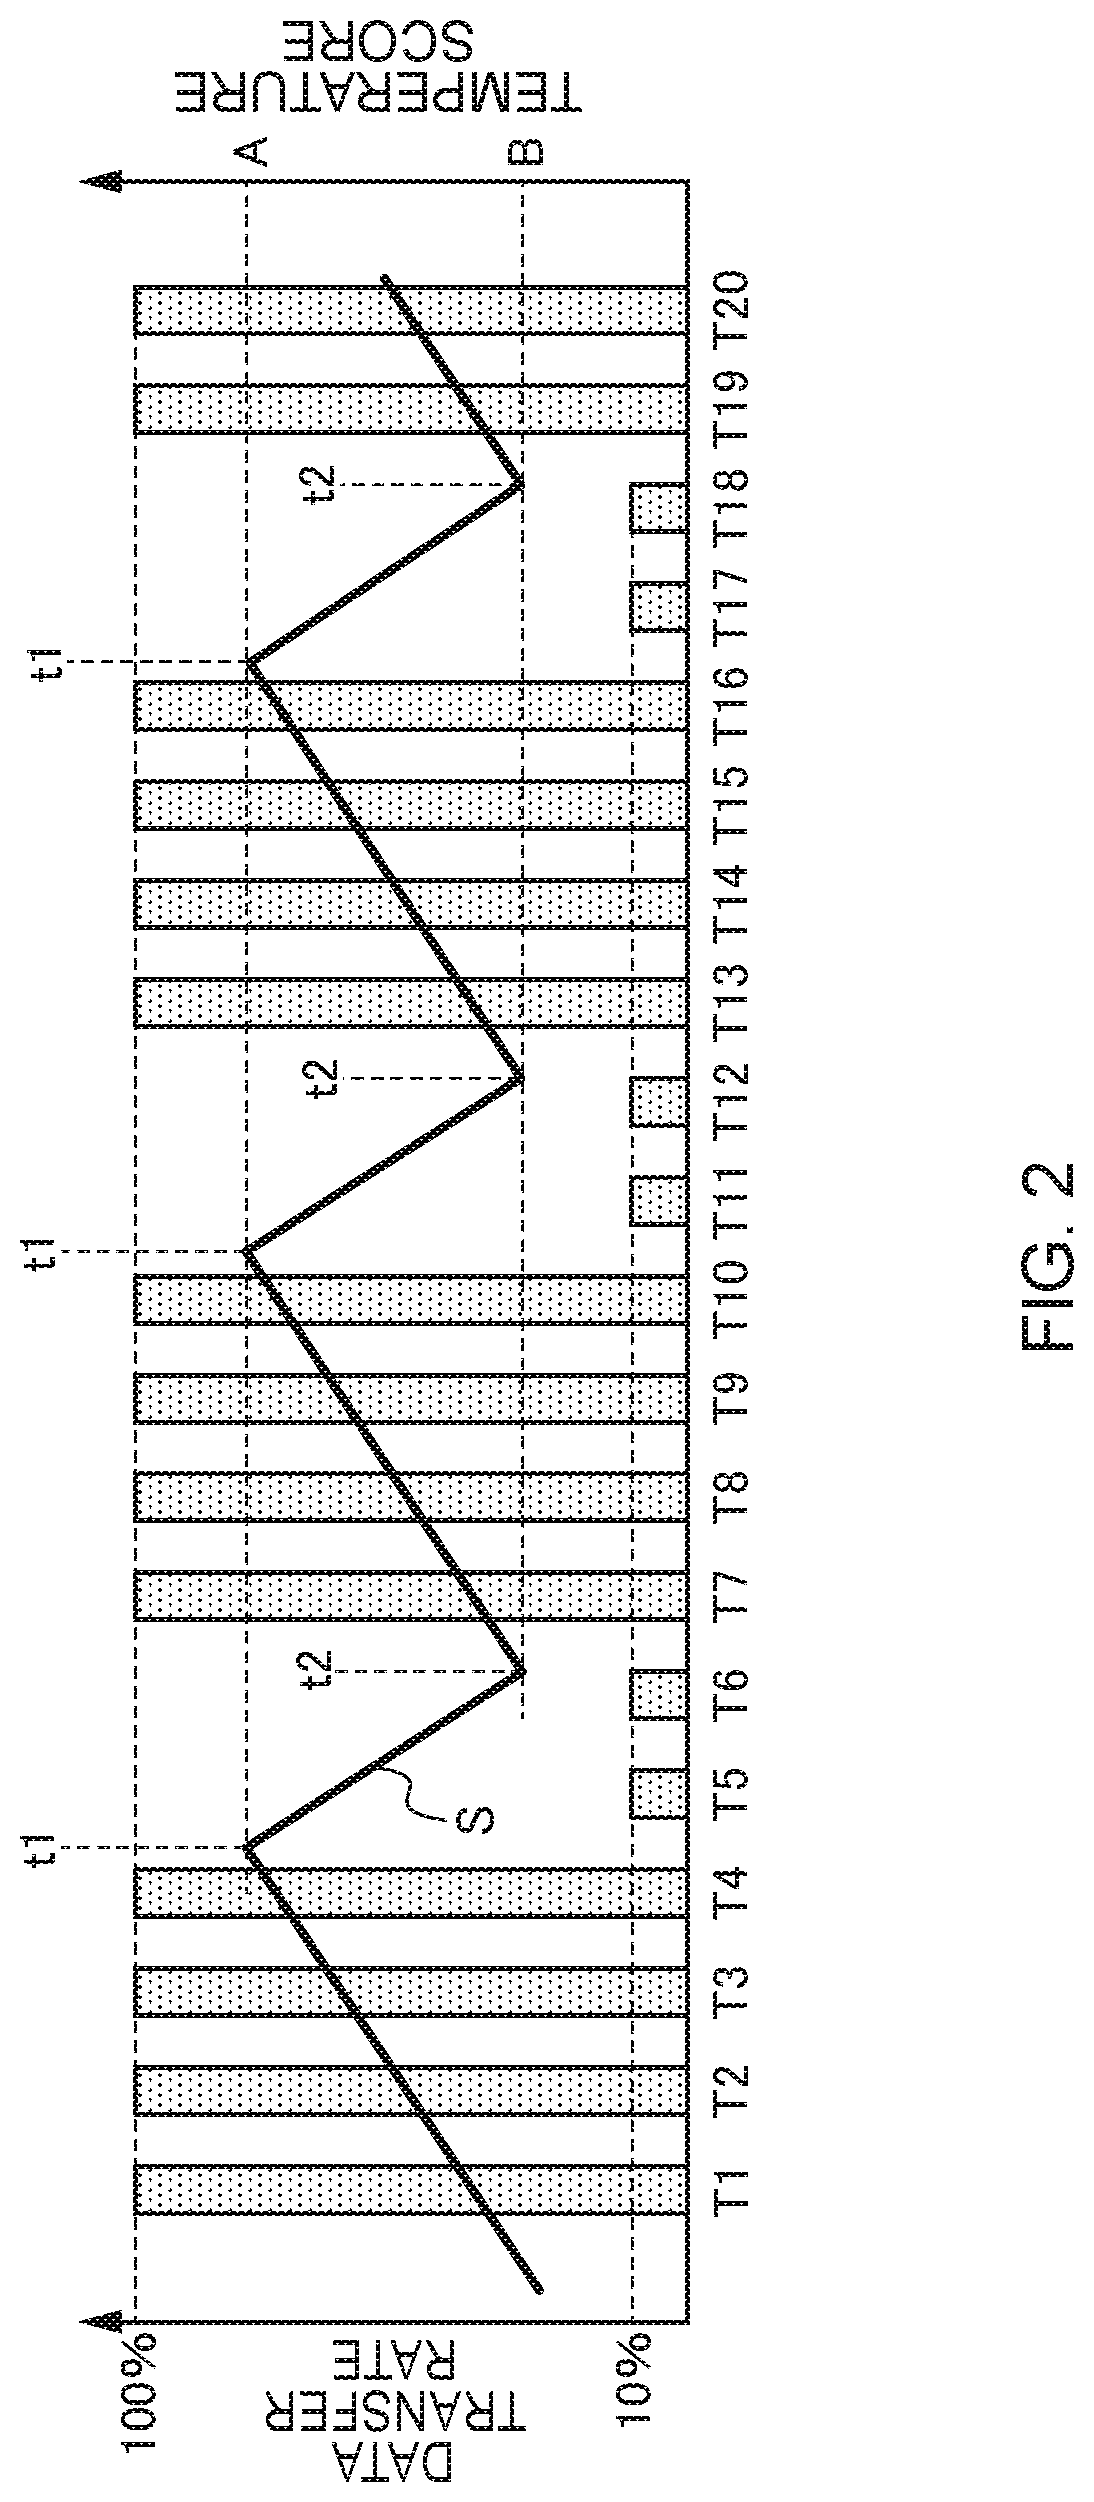 Memory controller and flash memory system having the same